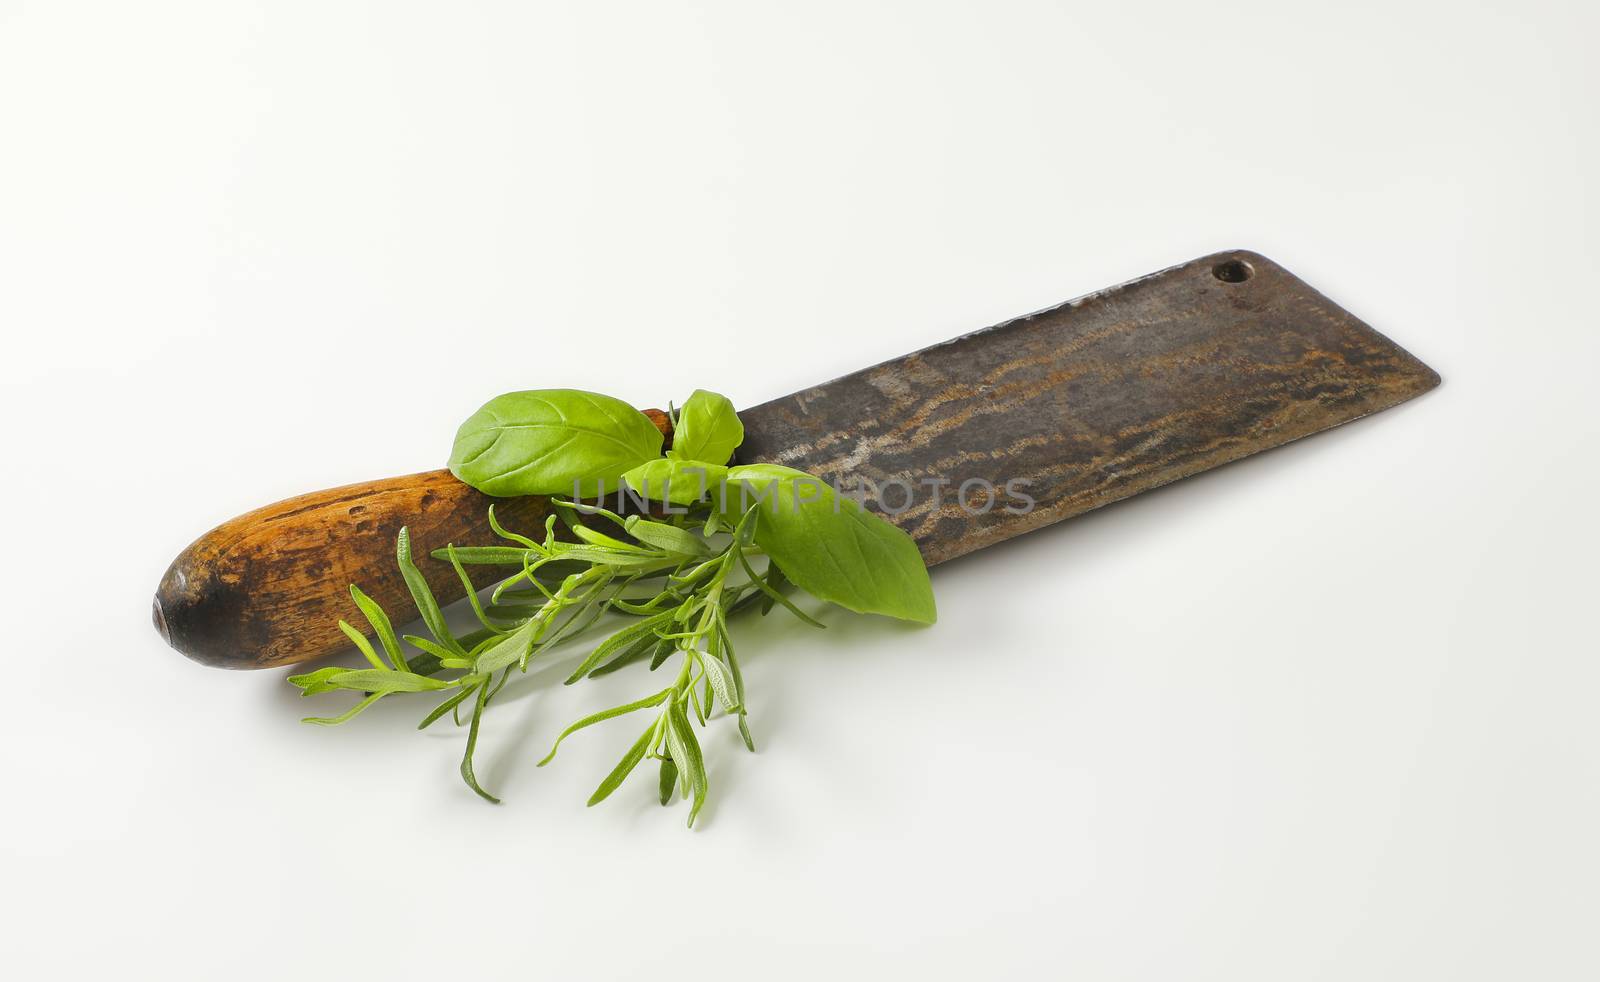 Old rusty meat cleaver knife with fresh basil and rosemary